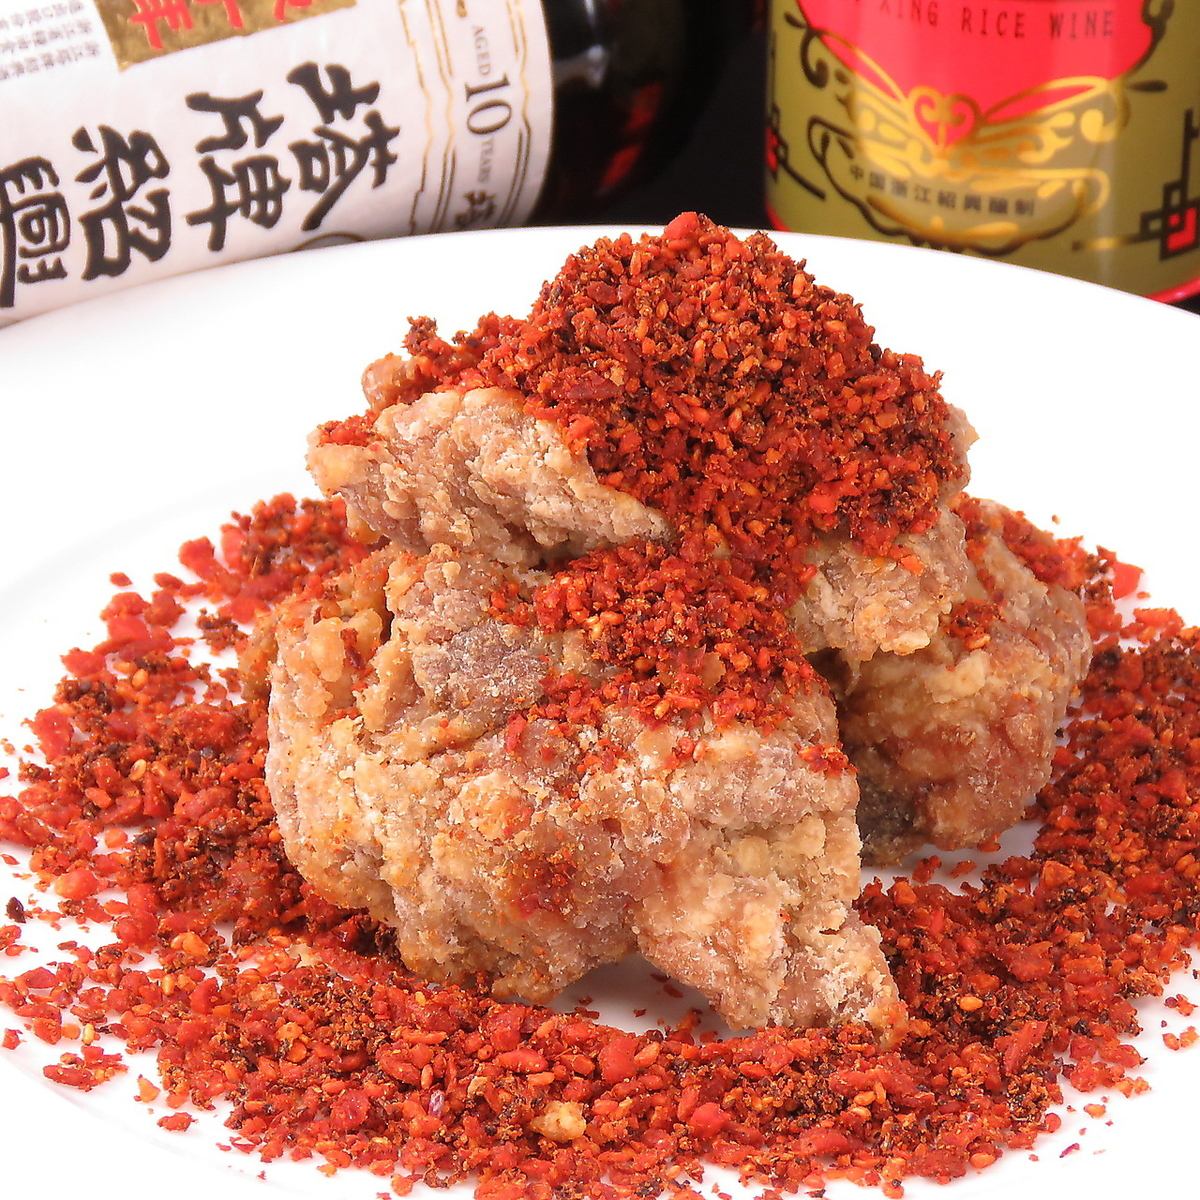 Homemade seasonings such as XO sauce and miso.Recommended is "Mao Zedong spare ribs"